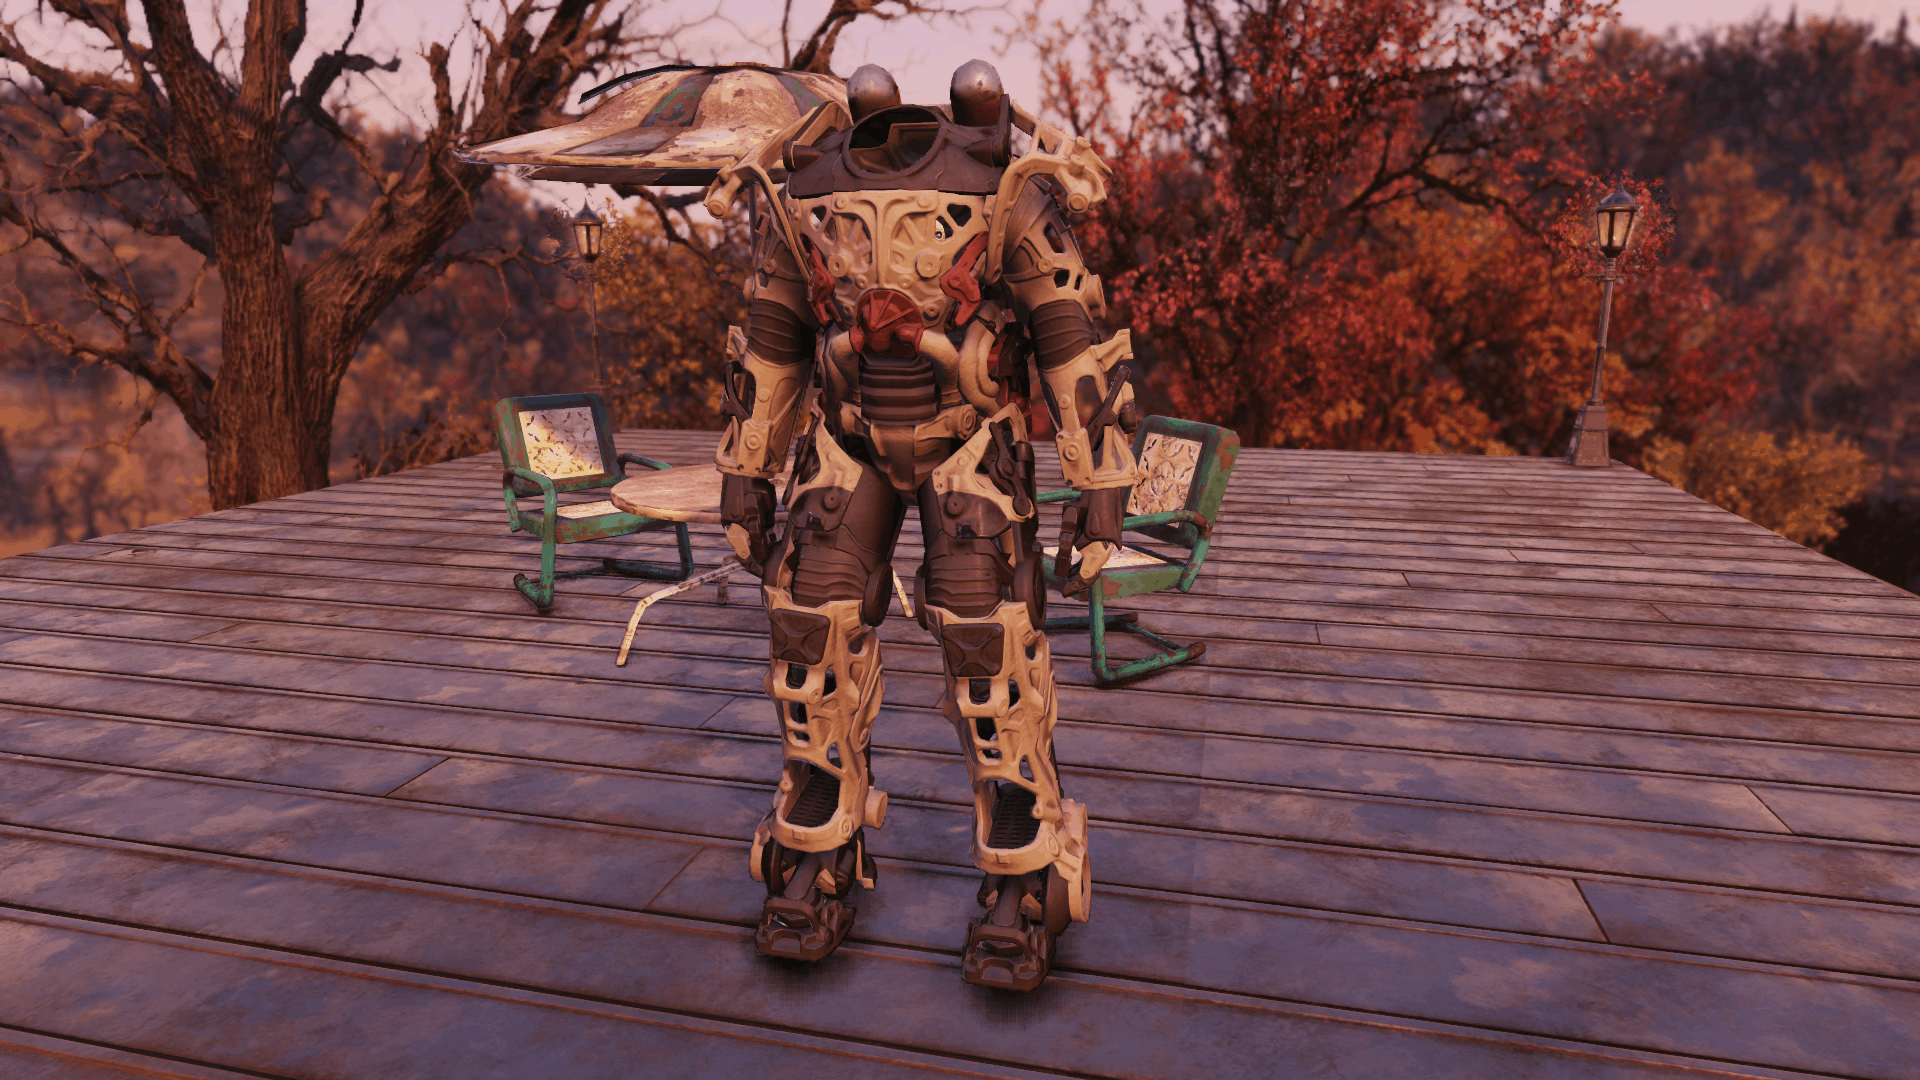 Power Armor Frame And Jetpack 2k Clean Fallout 76 Mod Download